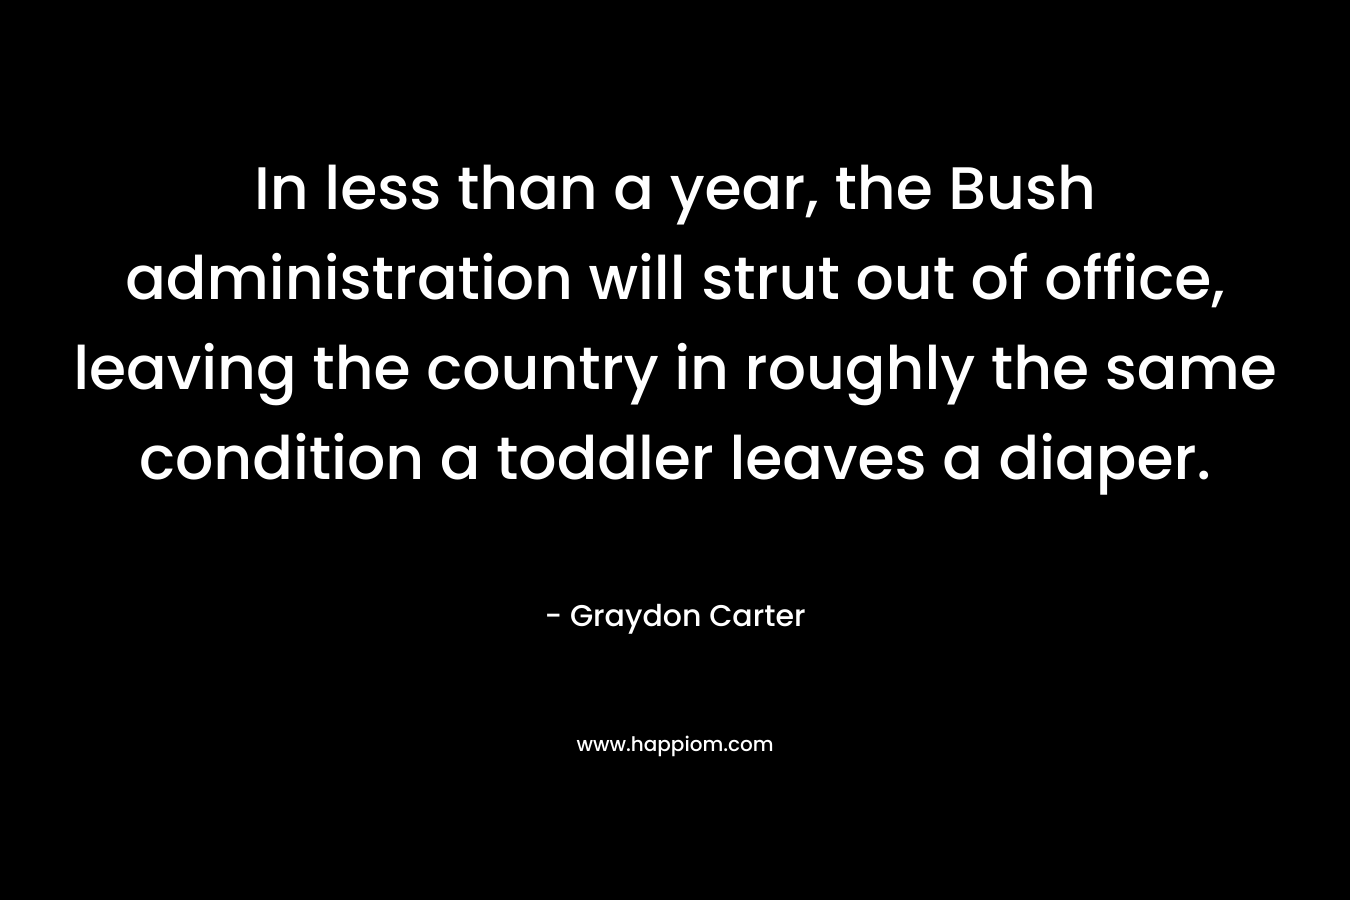 In less than a year, the Bush administration will strut out of office, leaving the country in roughly the same condition a toddler leaves a diaper.